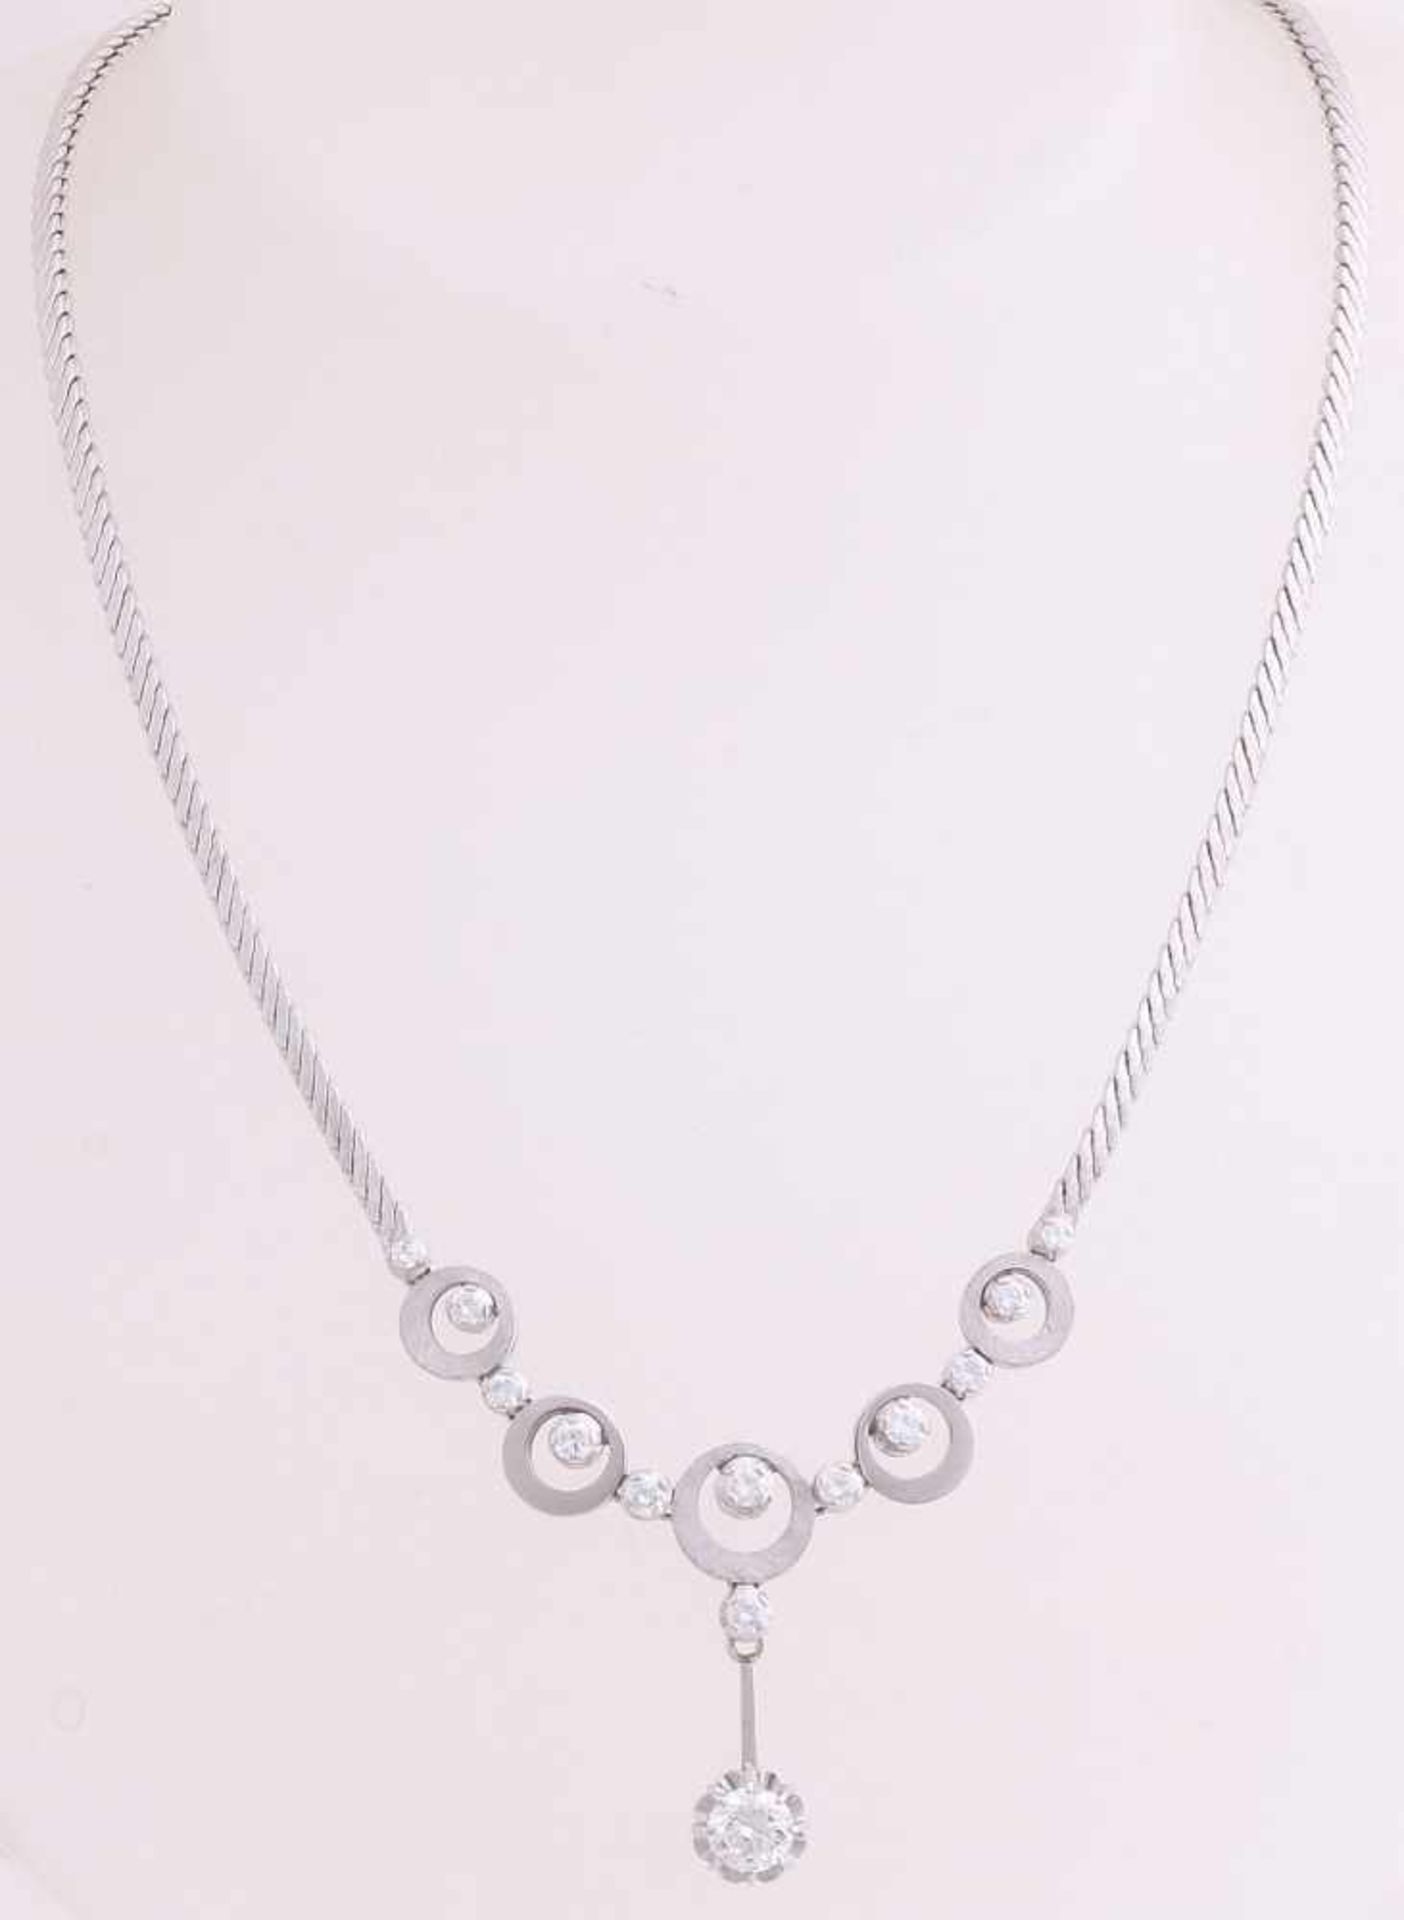 Beautiful white gold choker, 750/000, with diamonds. Choker with 5 circles in the middle, in order-